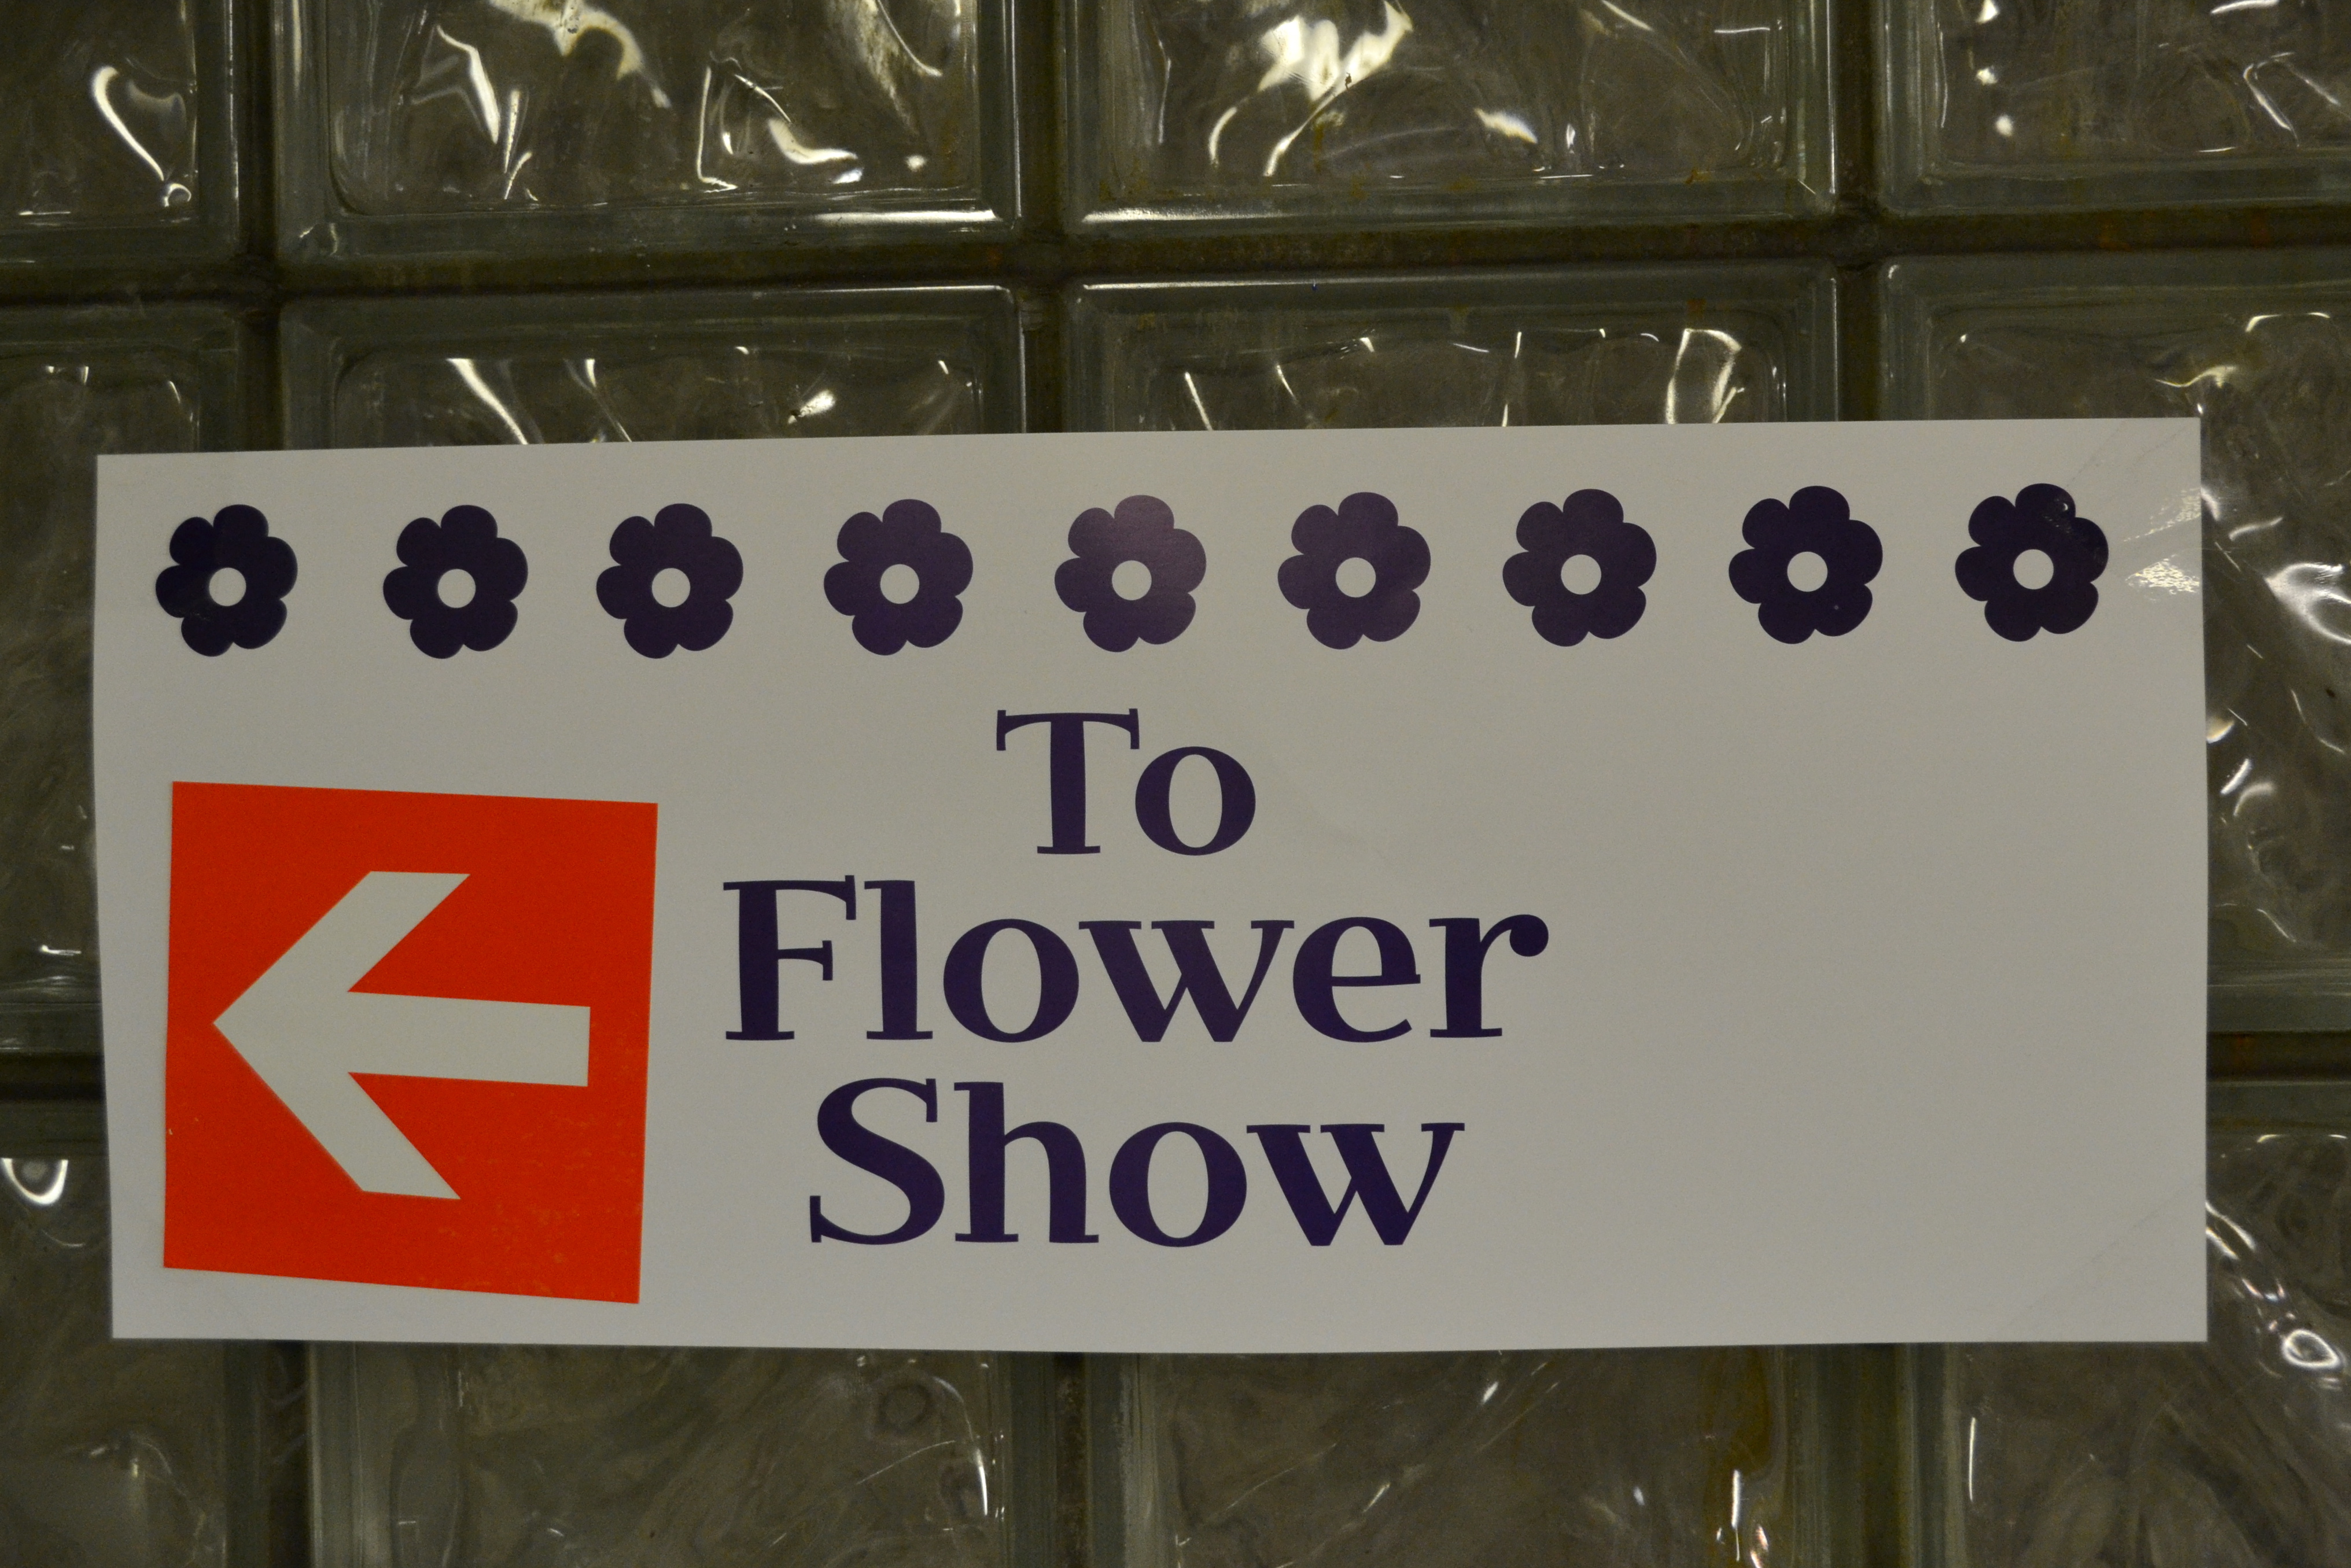 SEPTA added signs in nearby subway stations directing riders to the Flower Show